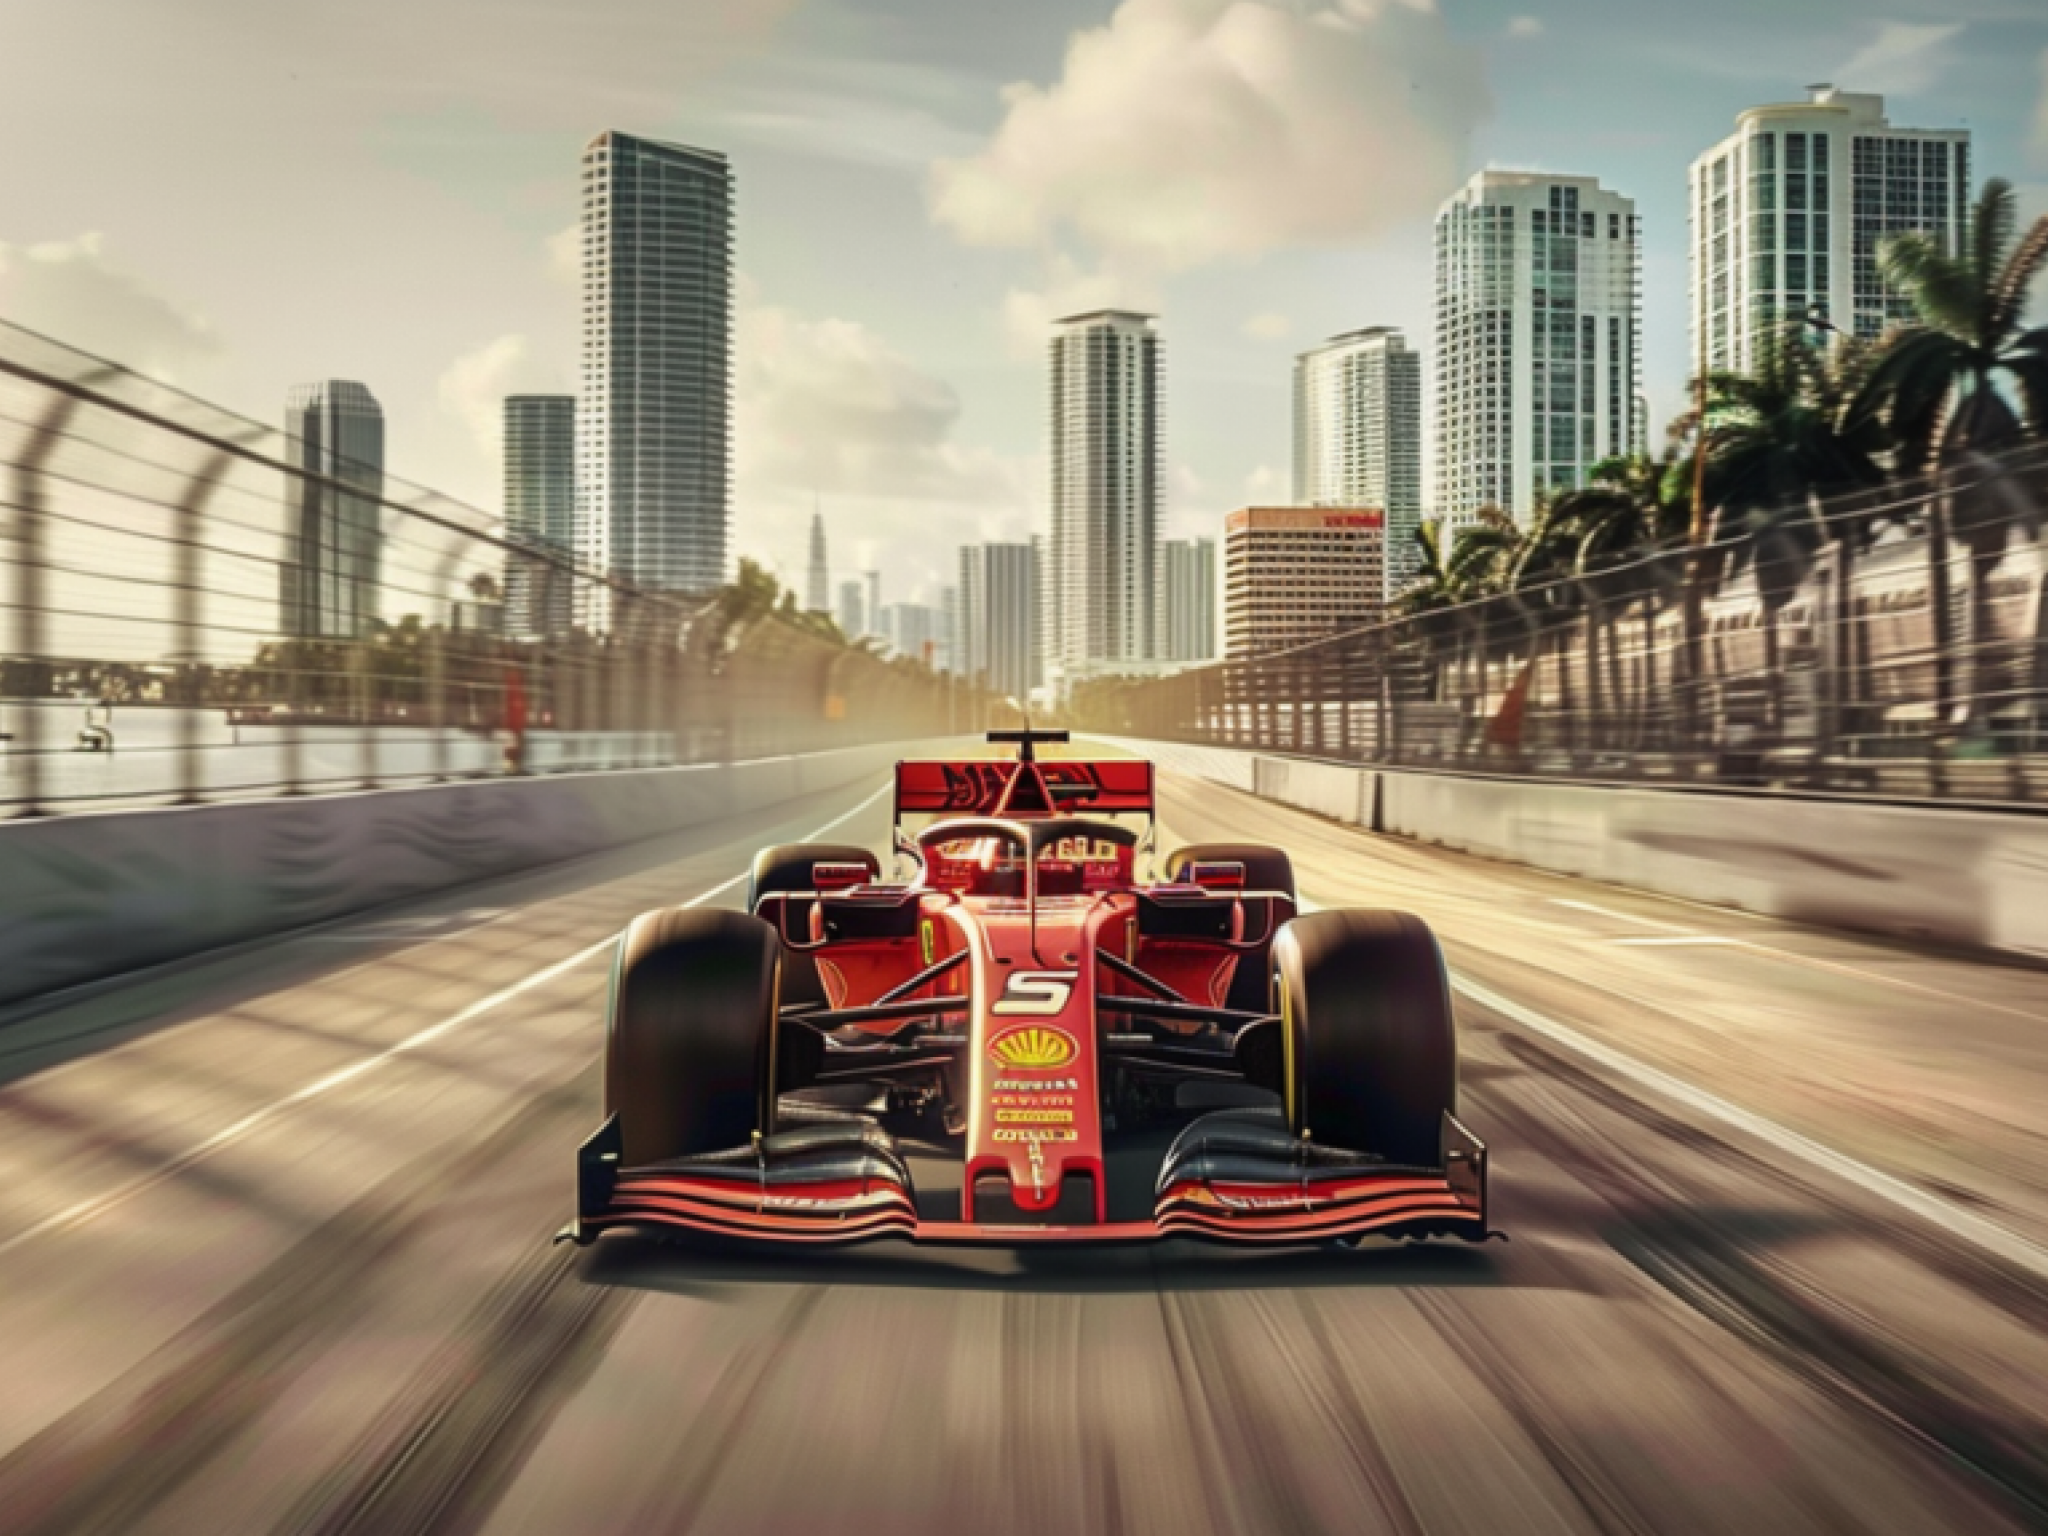  formula-1-stops-trump-fundraiser-miami-grand-prix-connection-to-dolphins-owner-draws-attention 